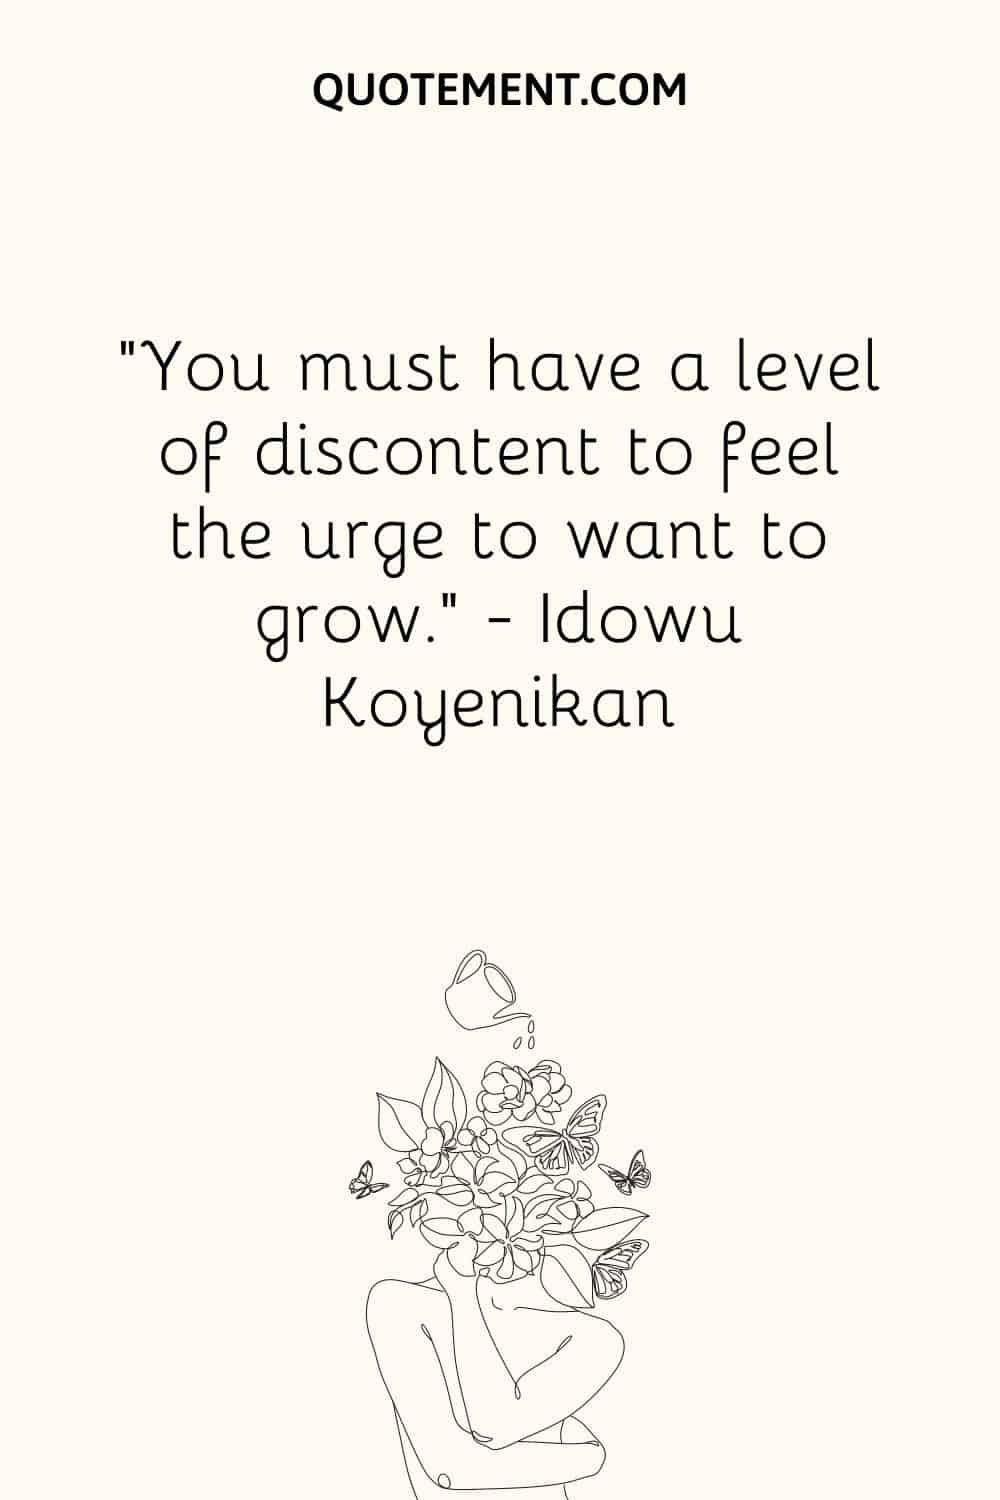 You must have a level of discontent to feel the urge to want to grow